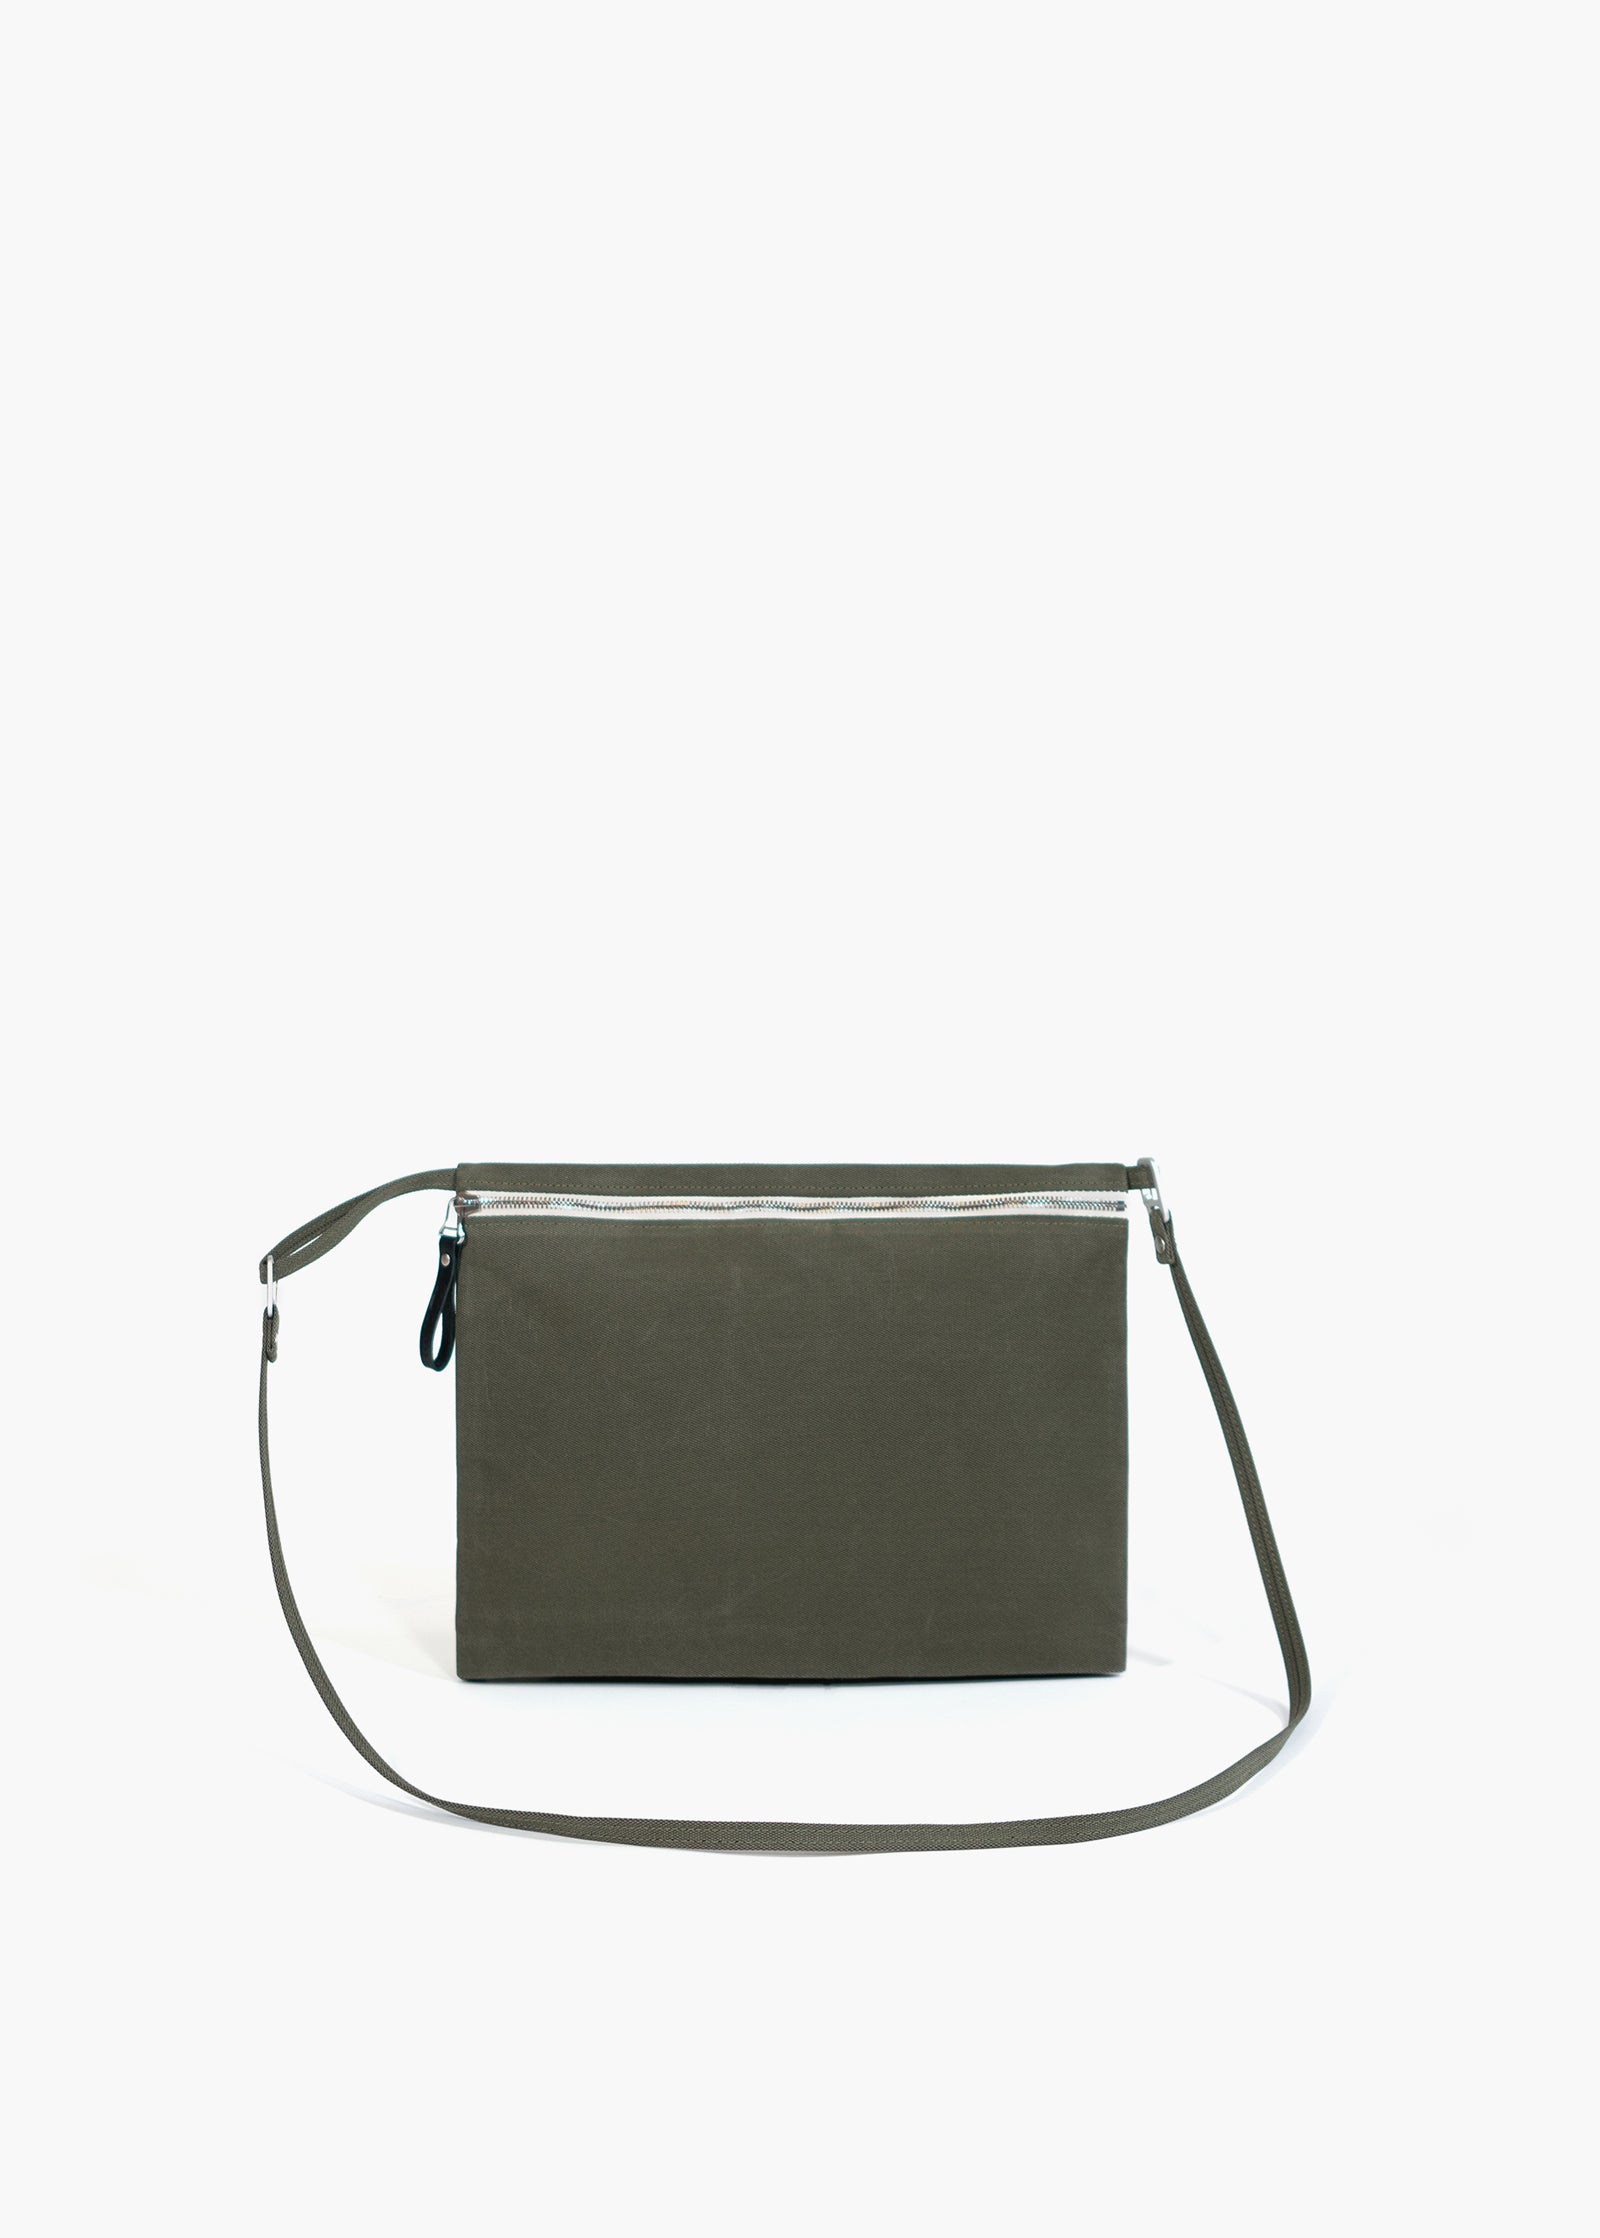 QWSTION + Monocle / Bananatex Folio A4 – Olive